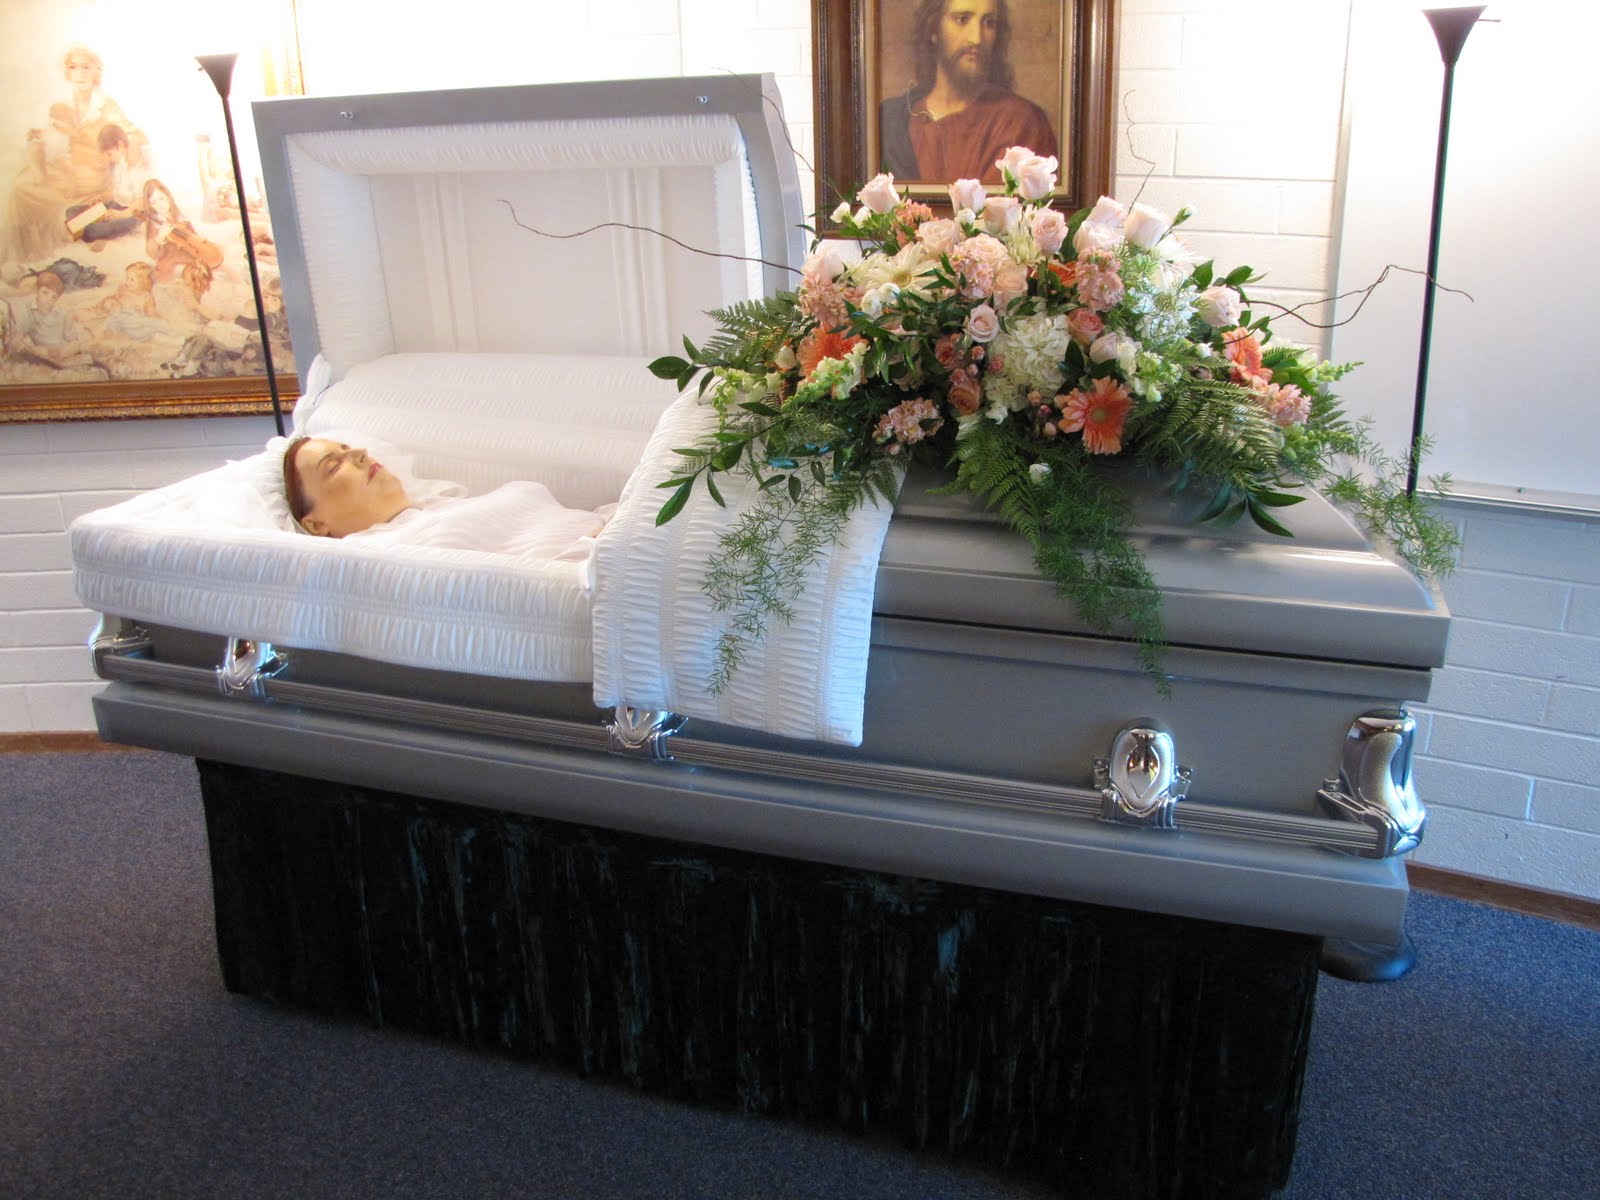 The Spamdrew Family: My Mother's Funeral